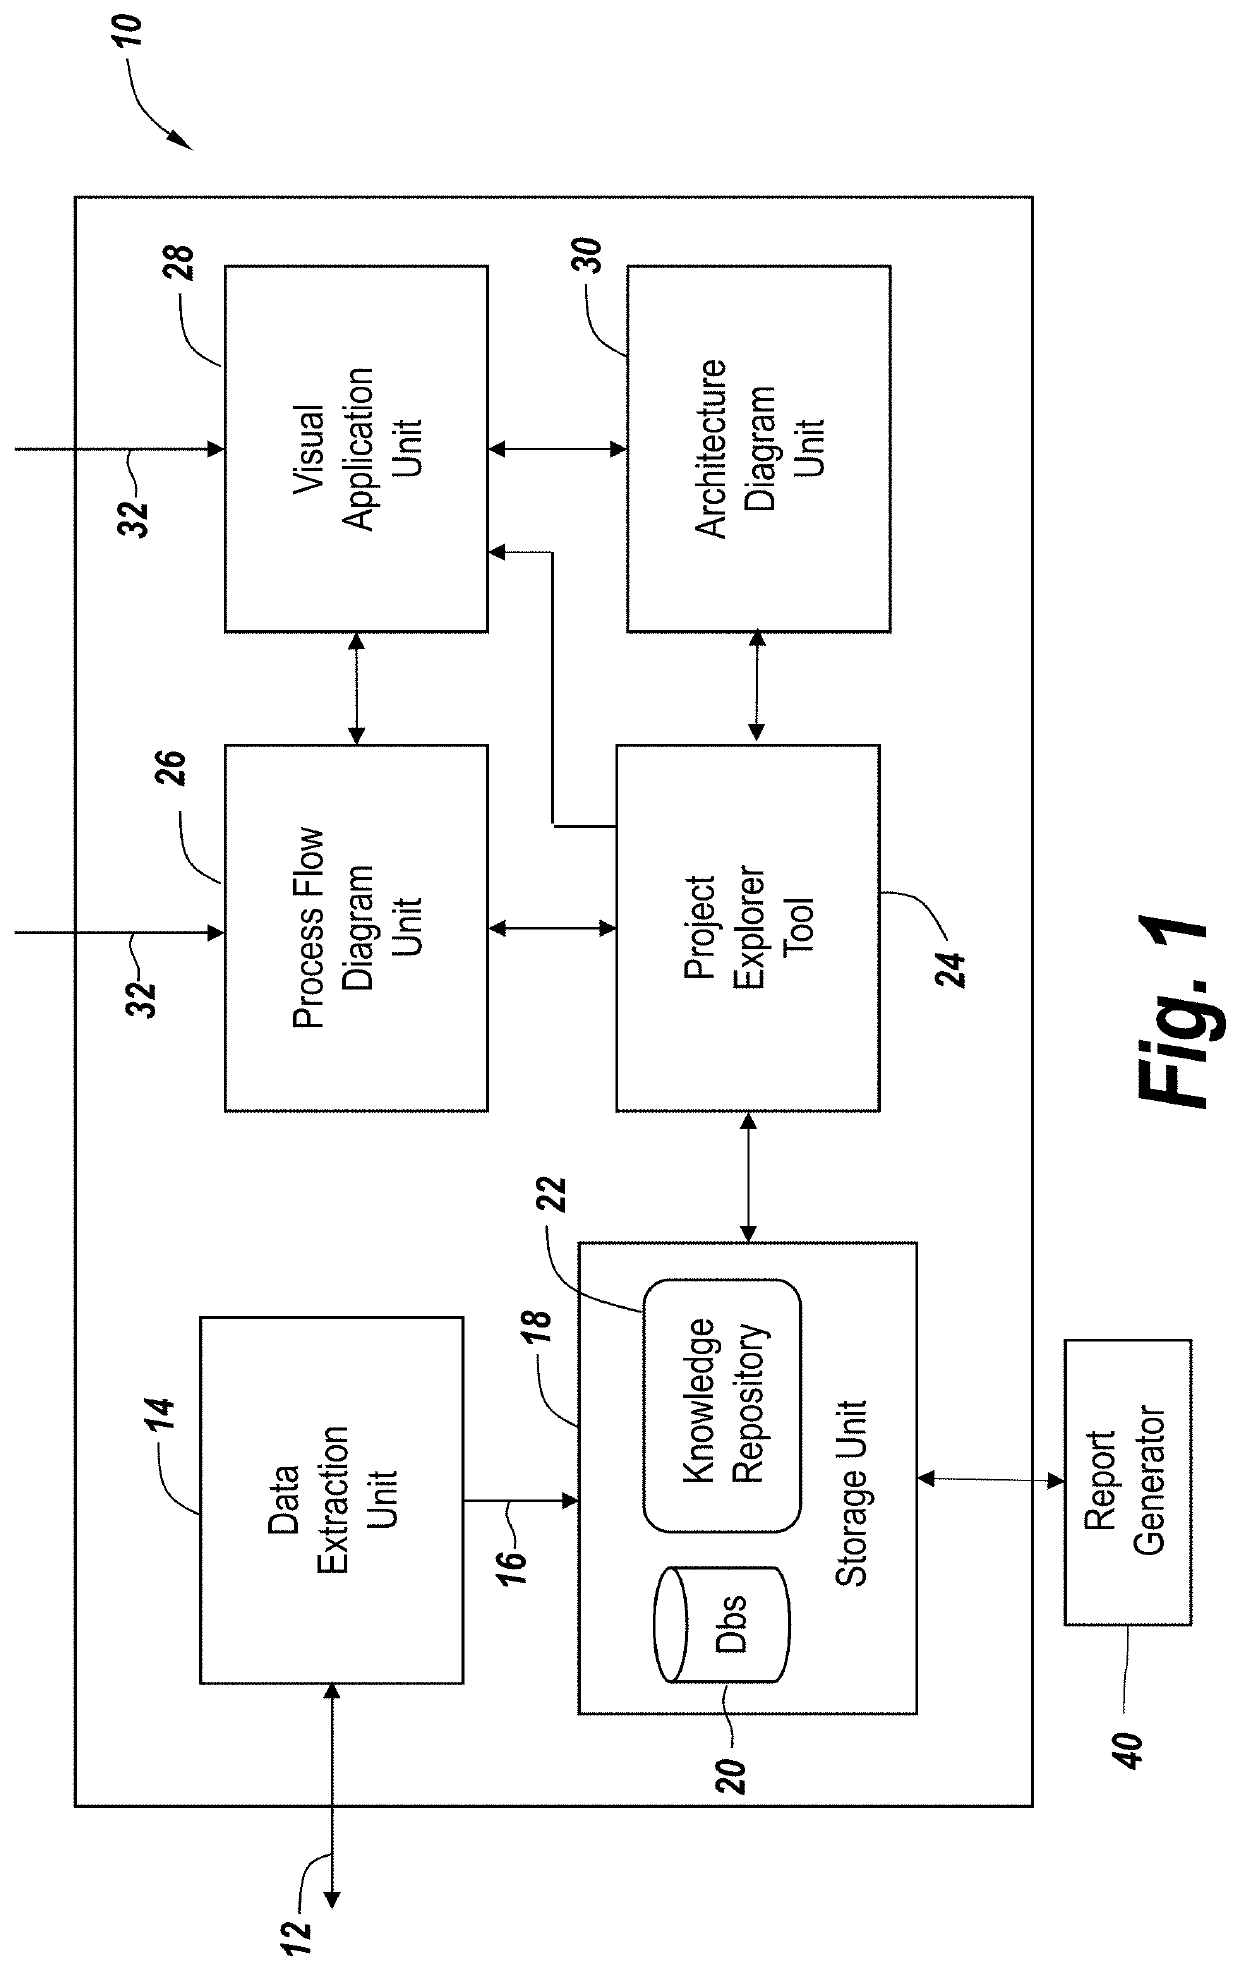 System and method for creating a process flow diagram which incorporates knowledge of the technical implementations of flow nodes